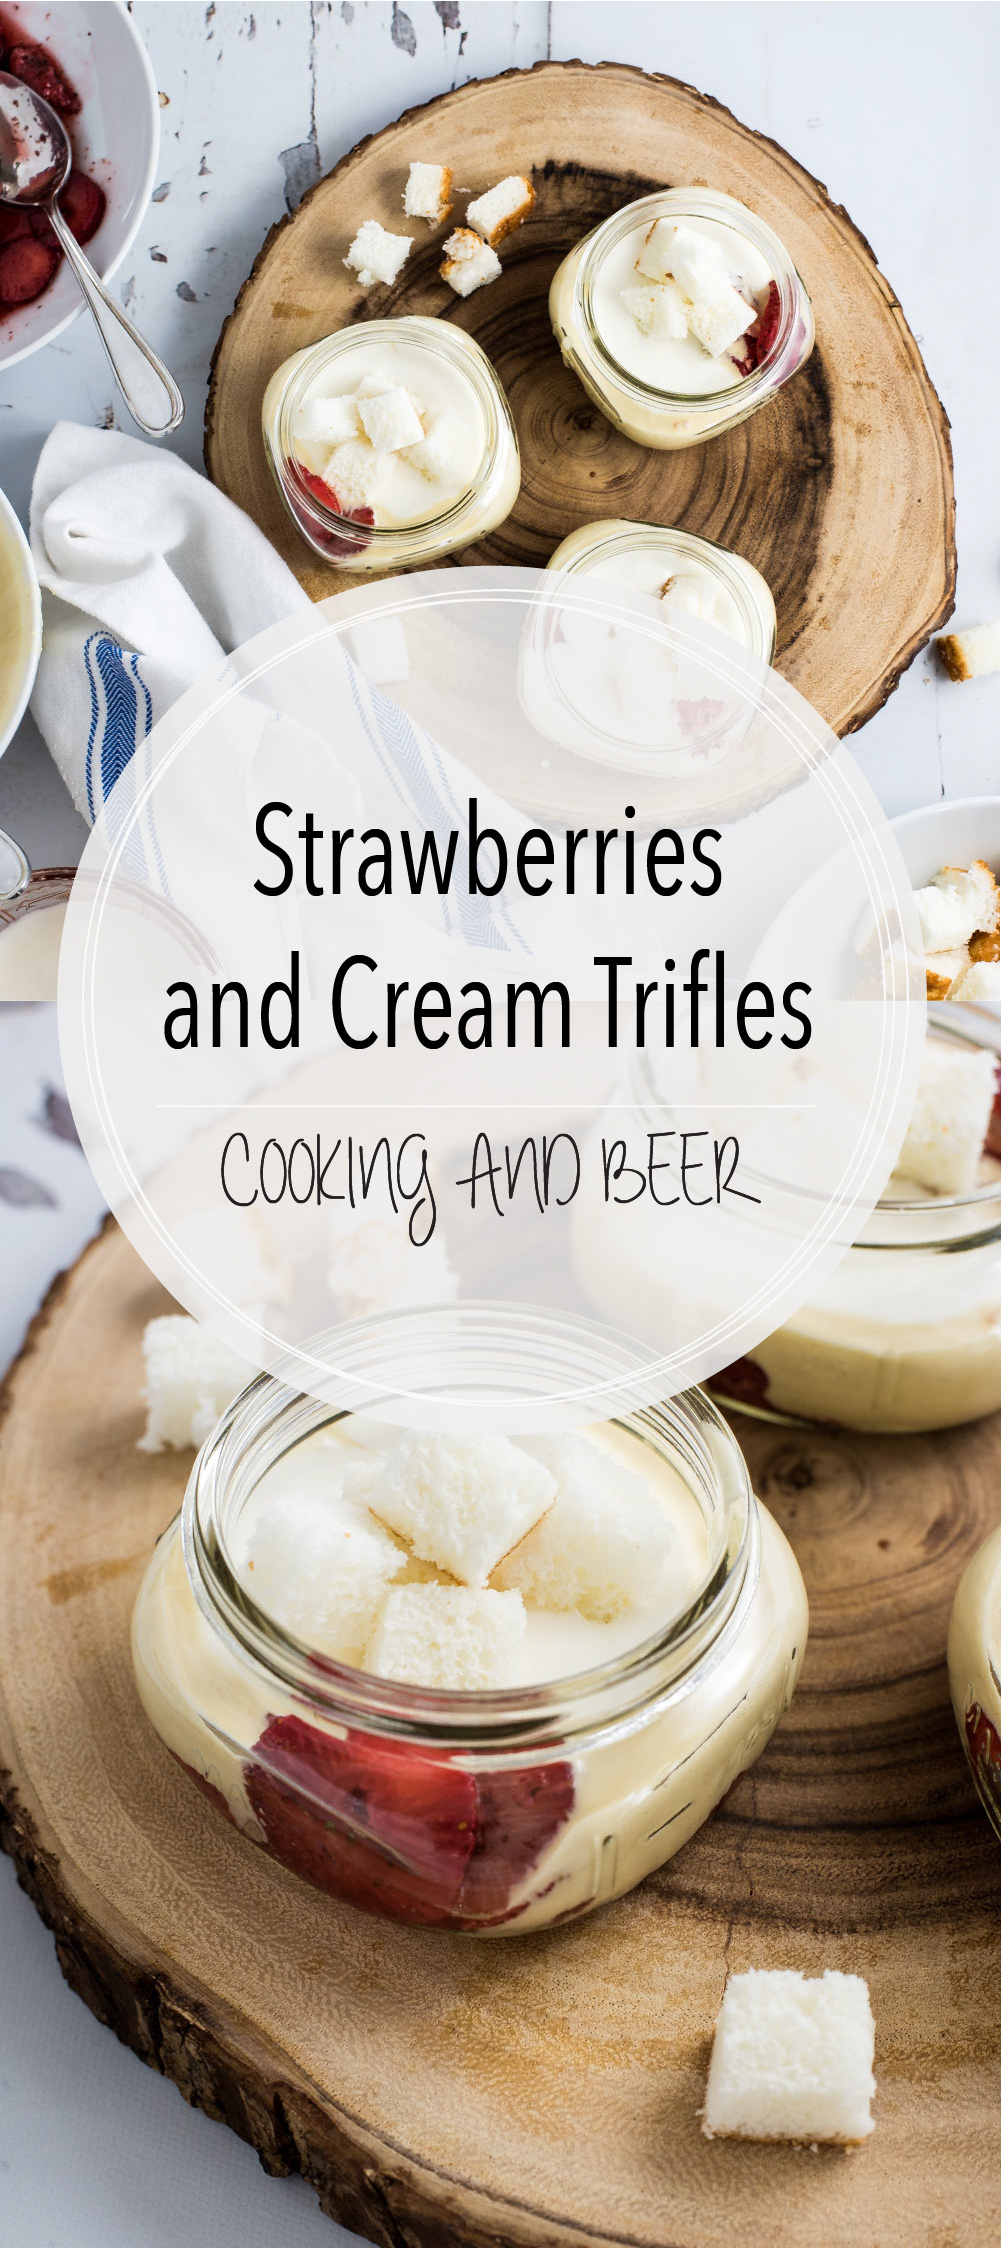 These strawberry and cream trifles are perfect for a spring picnic. They are loaded with strawberry goodness and laced with the perfect custard!